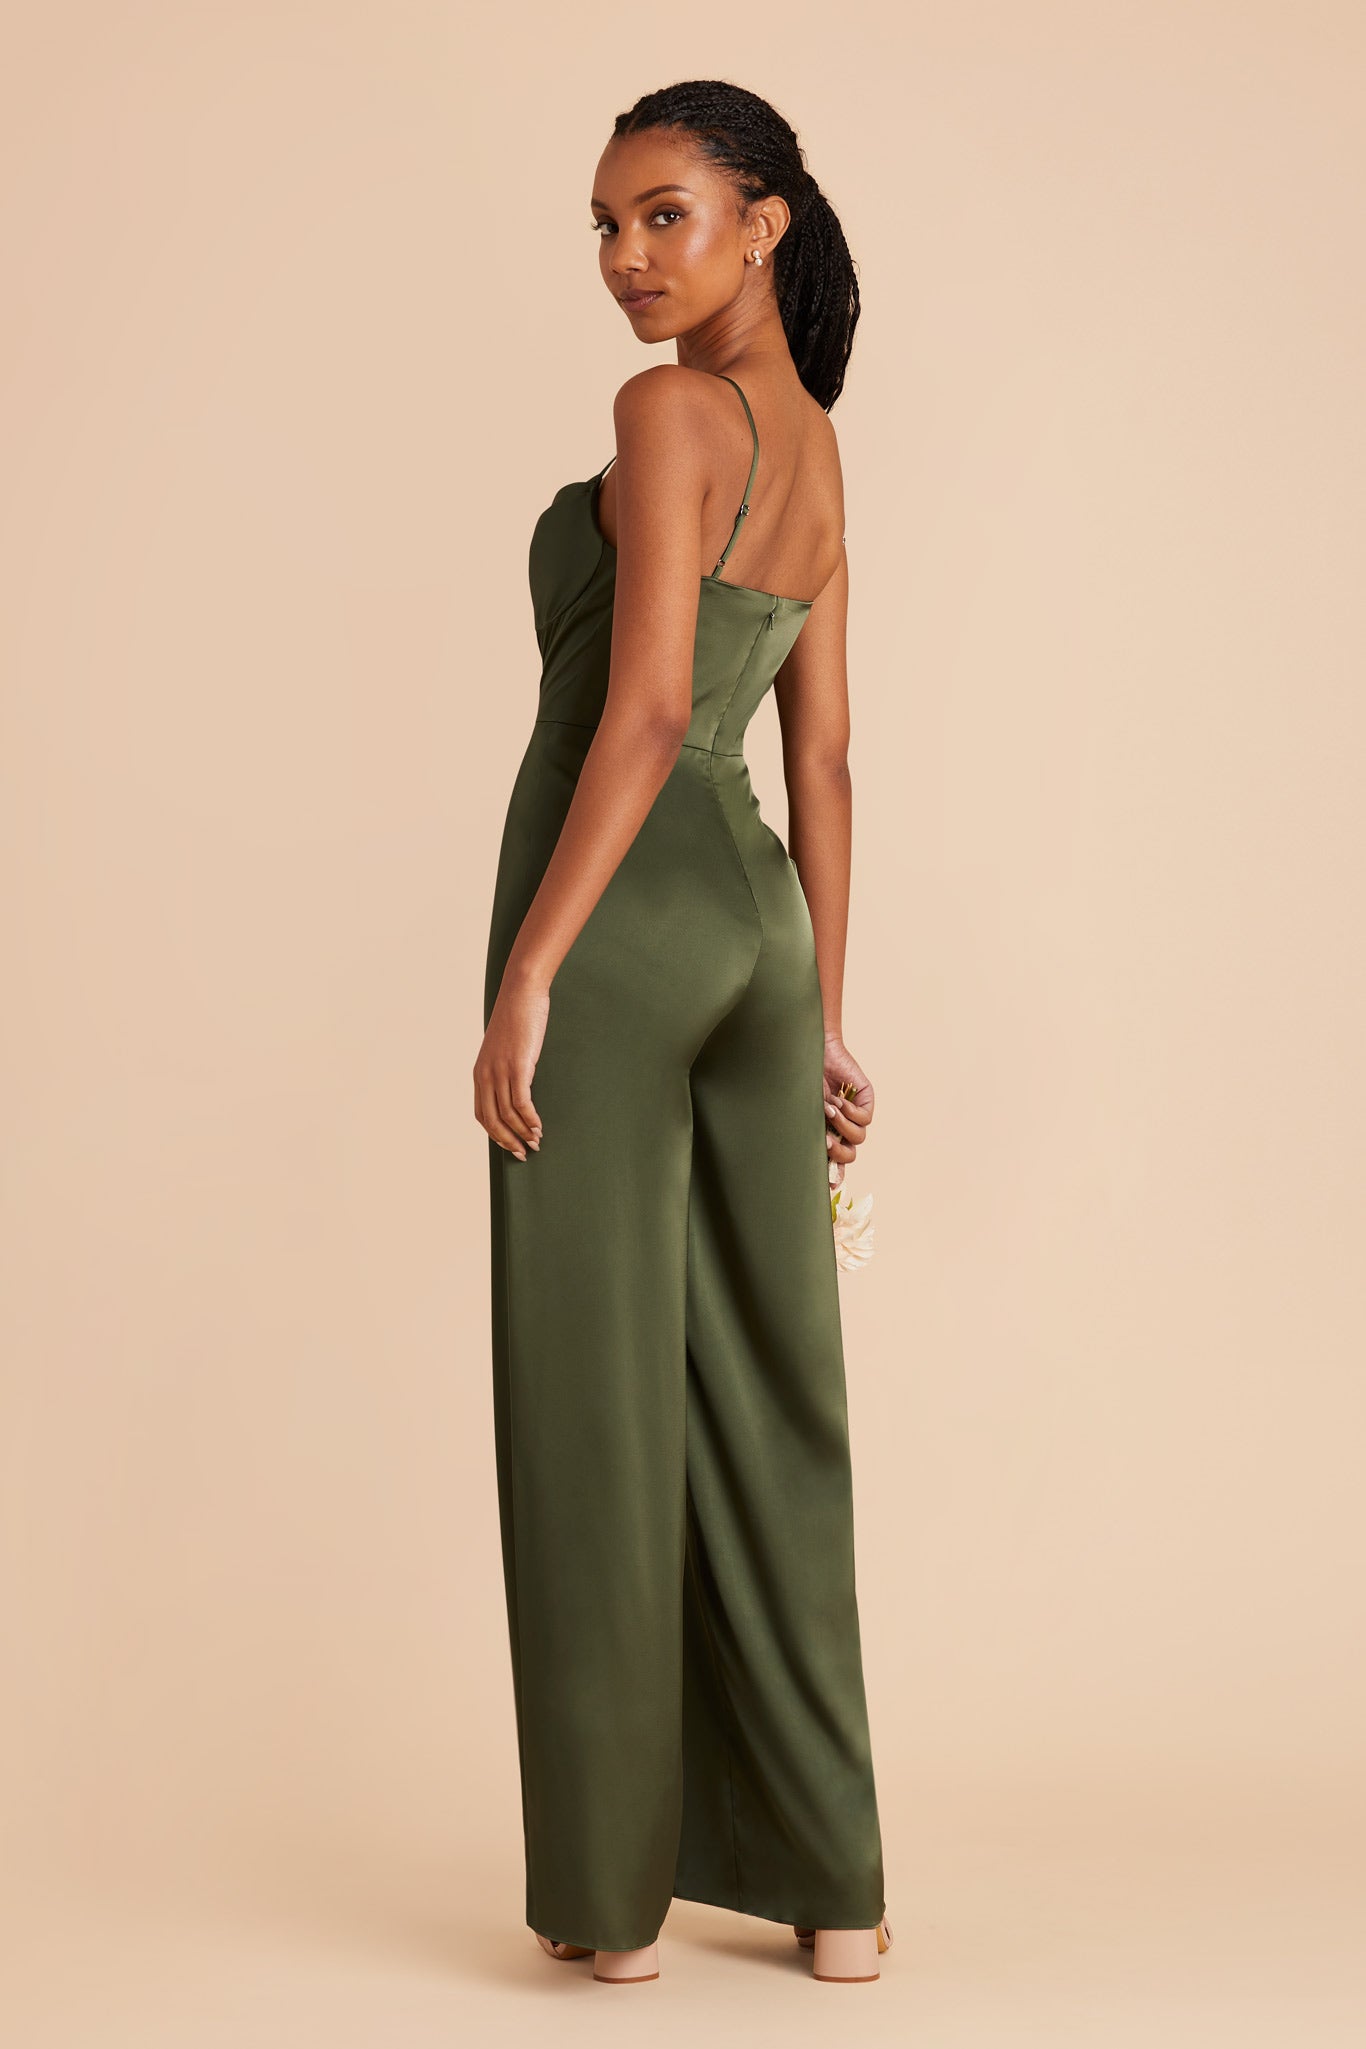 Olive Donna Matte Satin Bridesmaid Jumpsuit by Birdy Grey